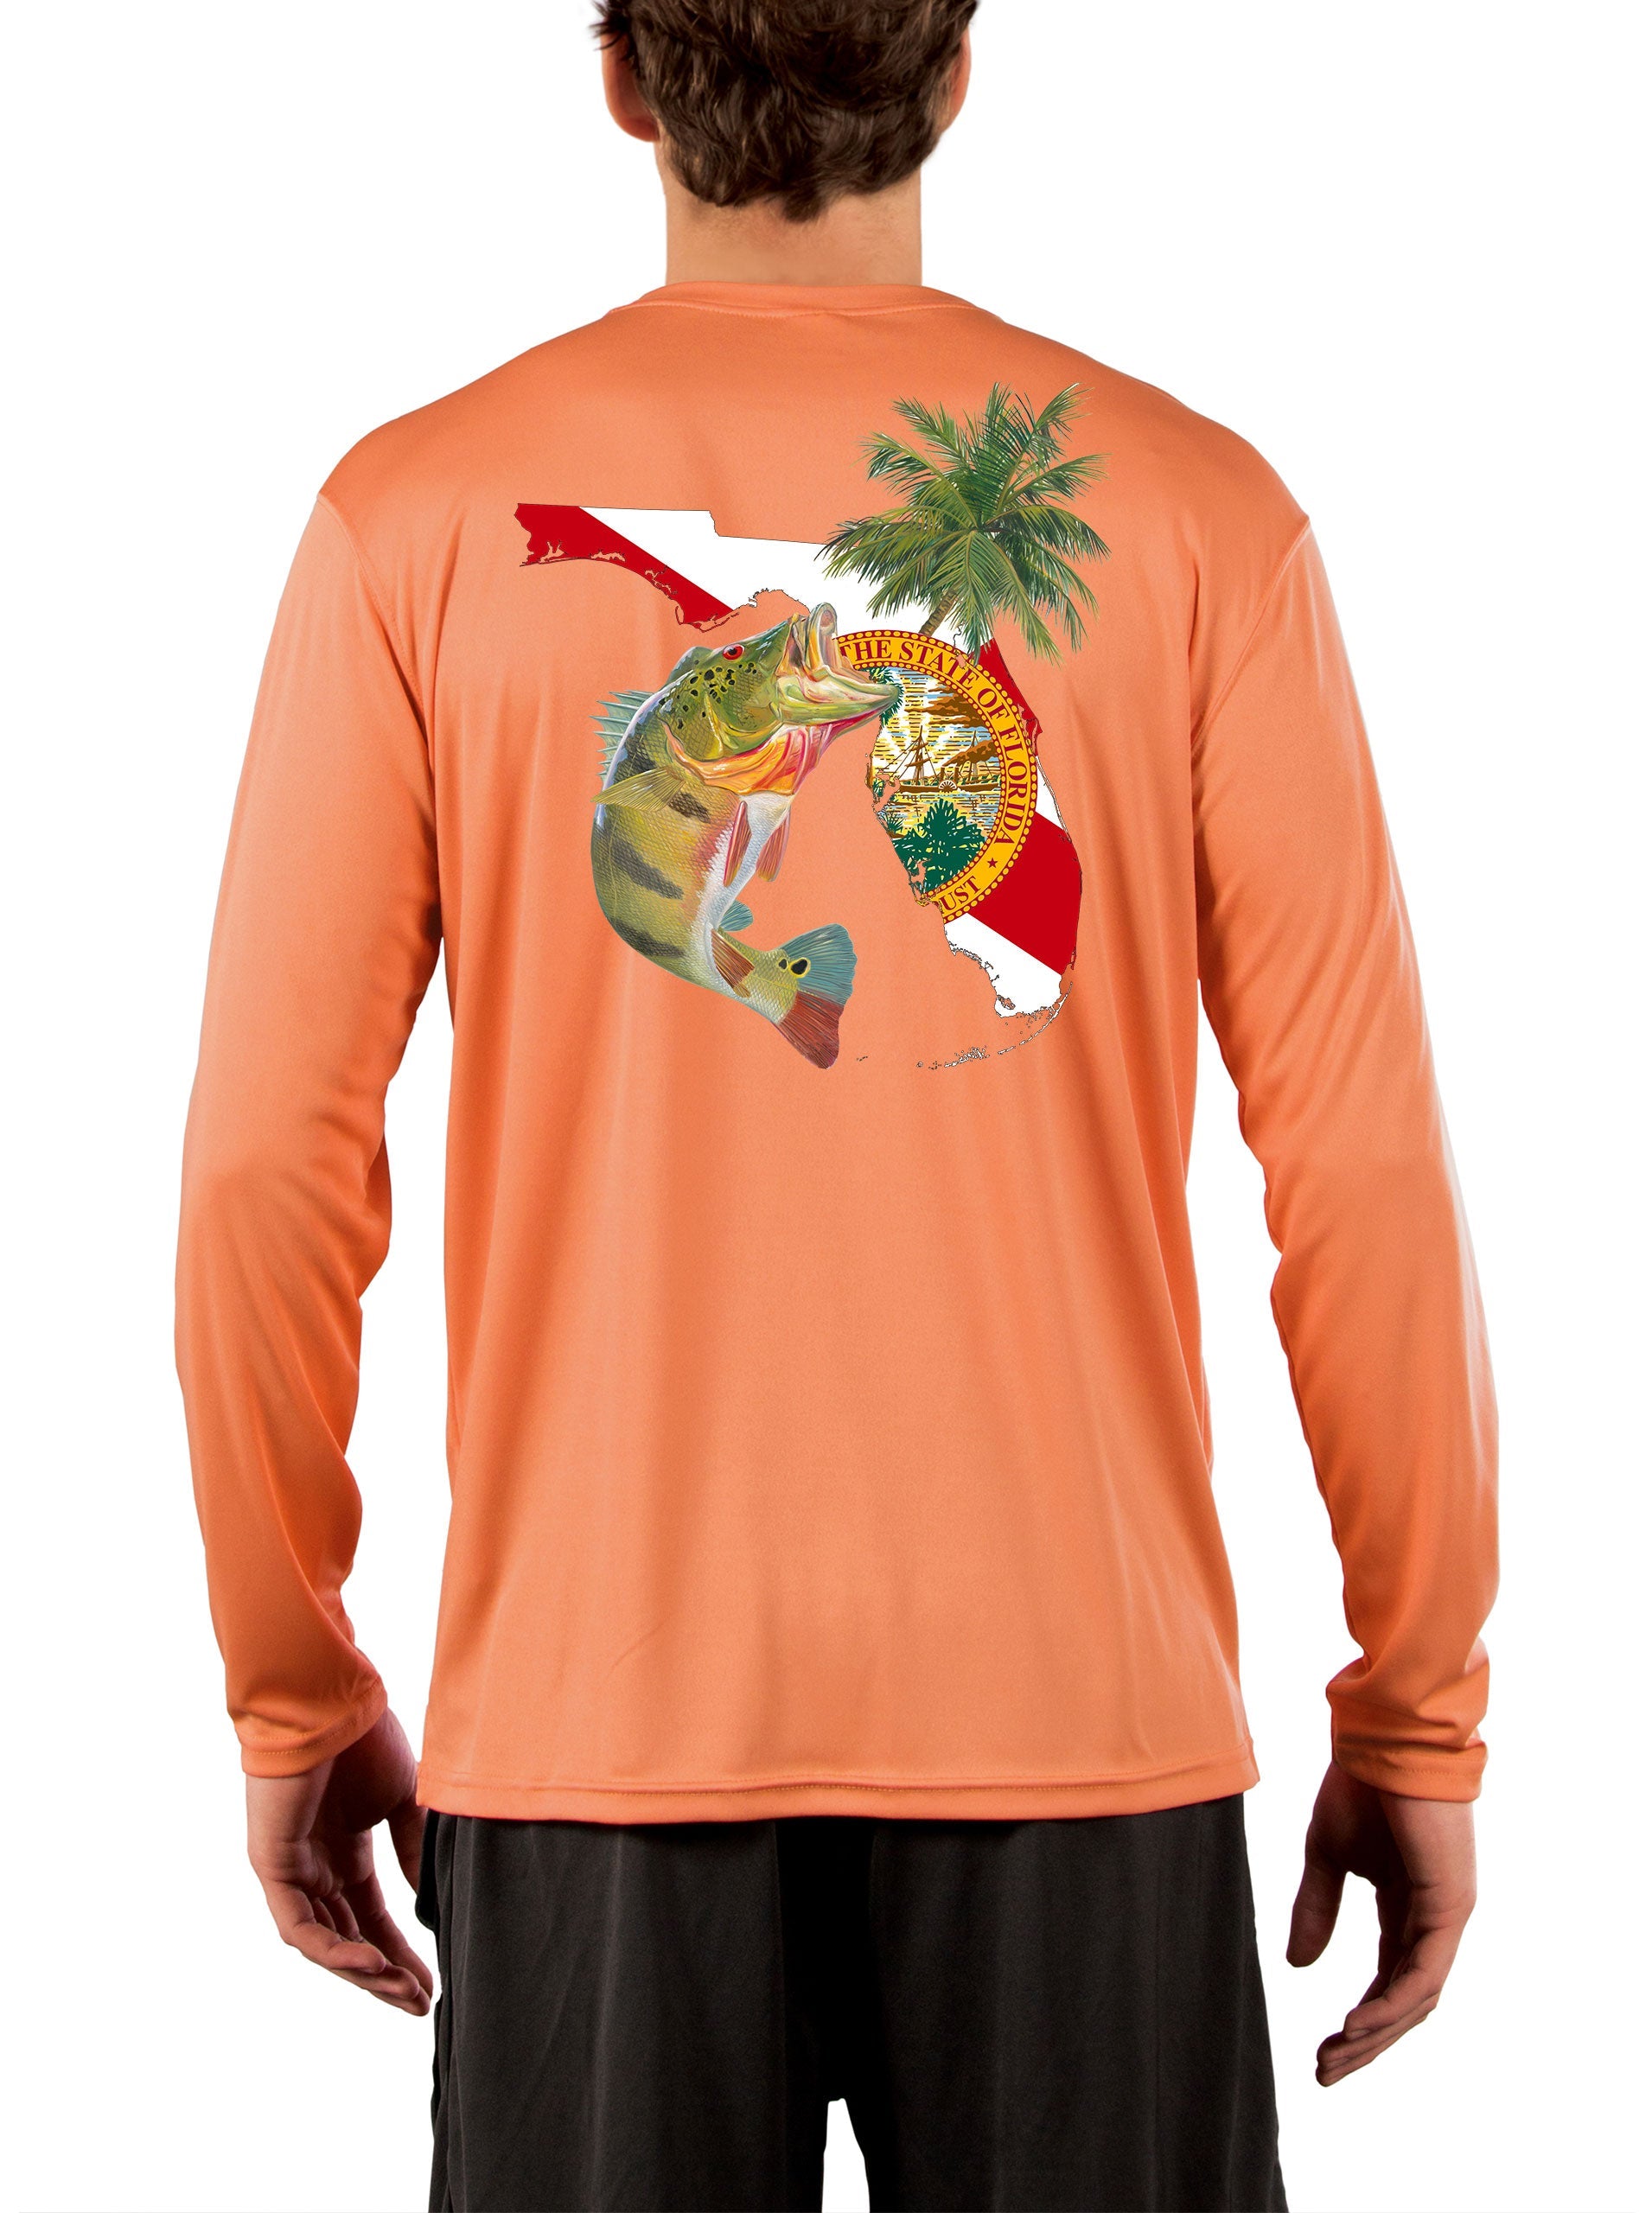 Peacock Bass Florida Map Fishing Shirts for Men with Optional